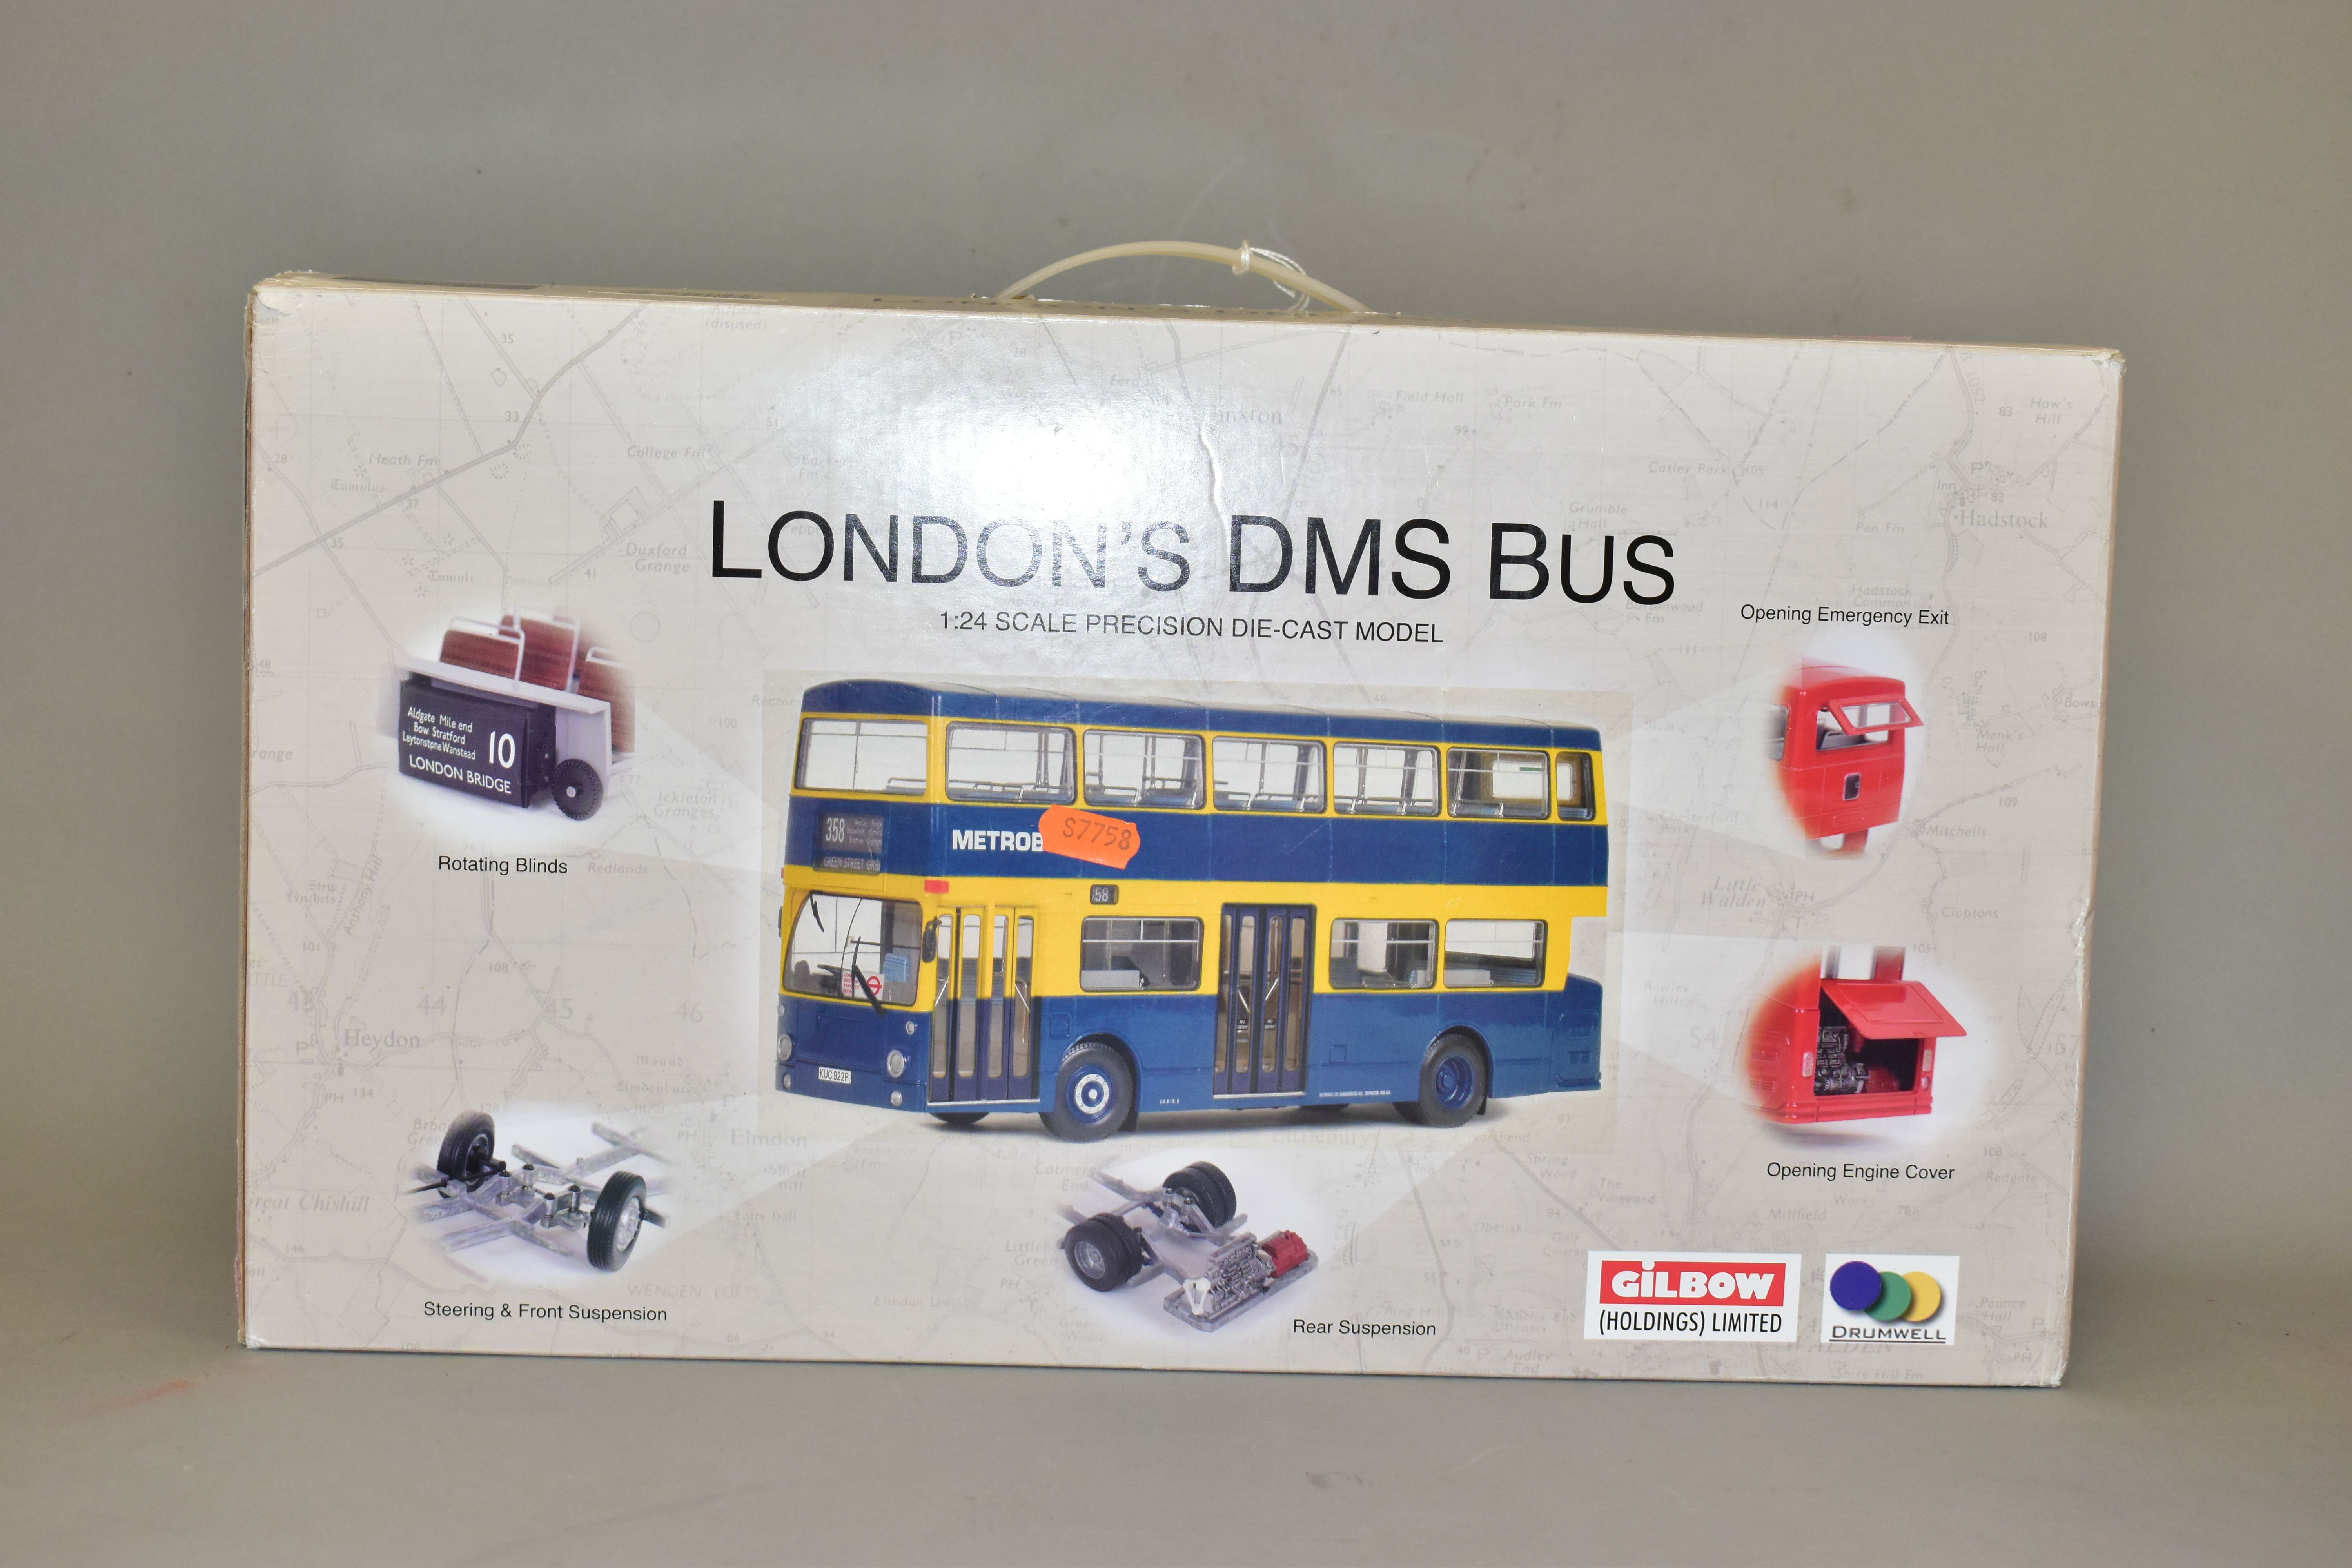 A BOXED GILBOW EXCLUSIVE FIRST EDITIONS DAIMLER FLEETLINE LONDON DMS CLASS BUS, No.99105 1:24 scale, - Image 6 of 6